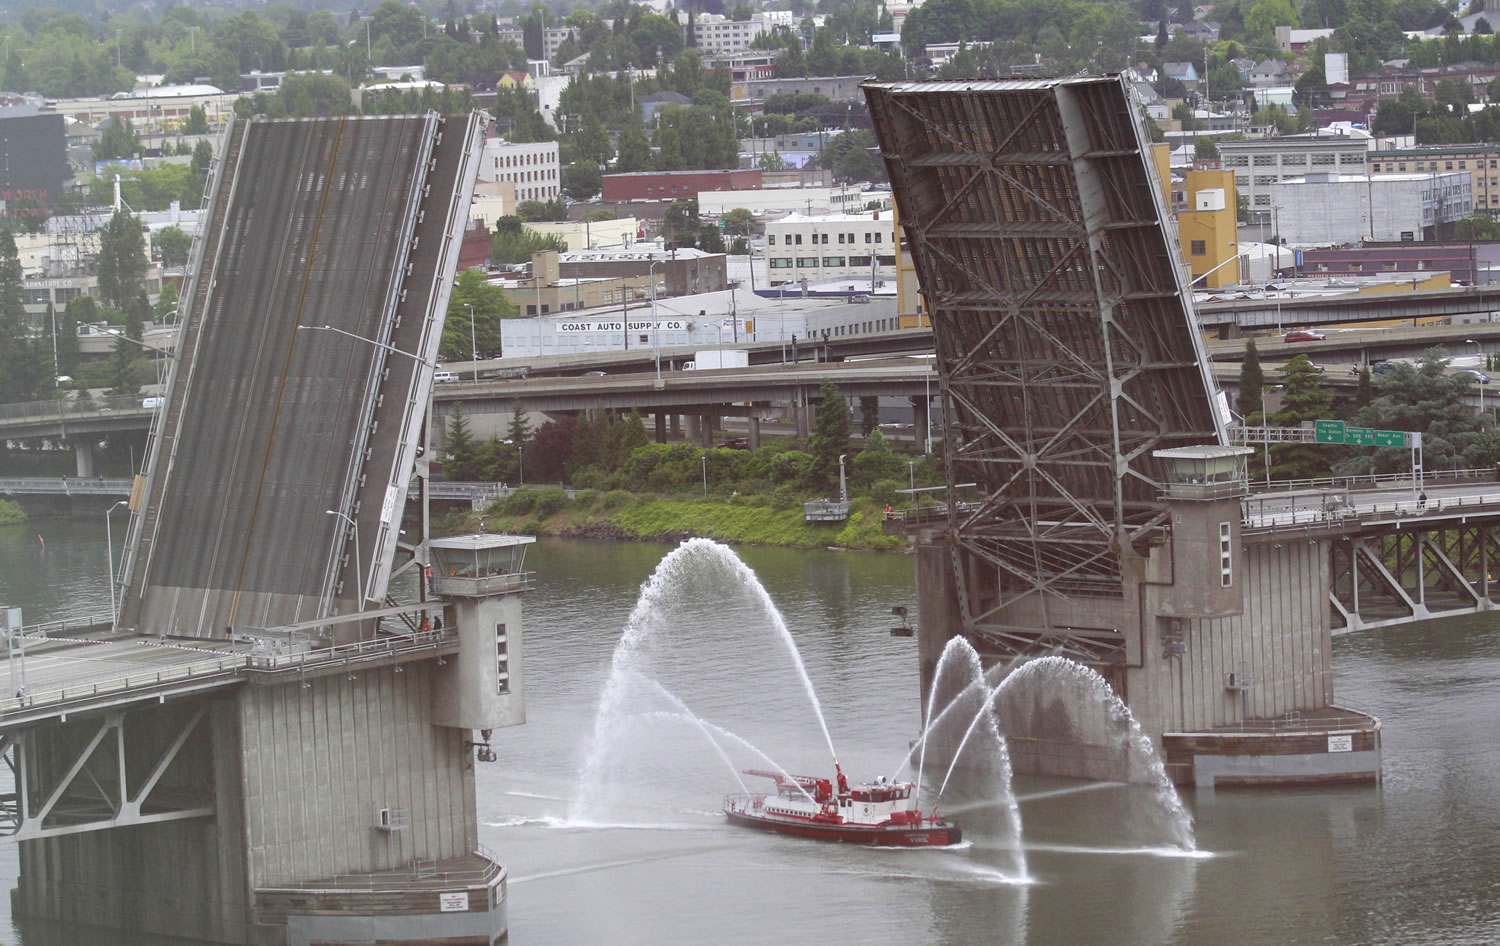 A Portland Fire Department fire boat shoots water into the air as it passes under the Morrison Bridge to celebrate the start of the Rose Festival fleet week Wednesday, June 8, 2011.